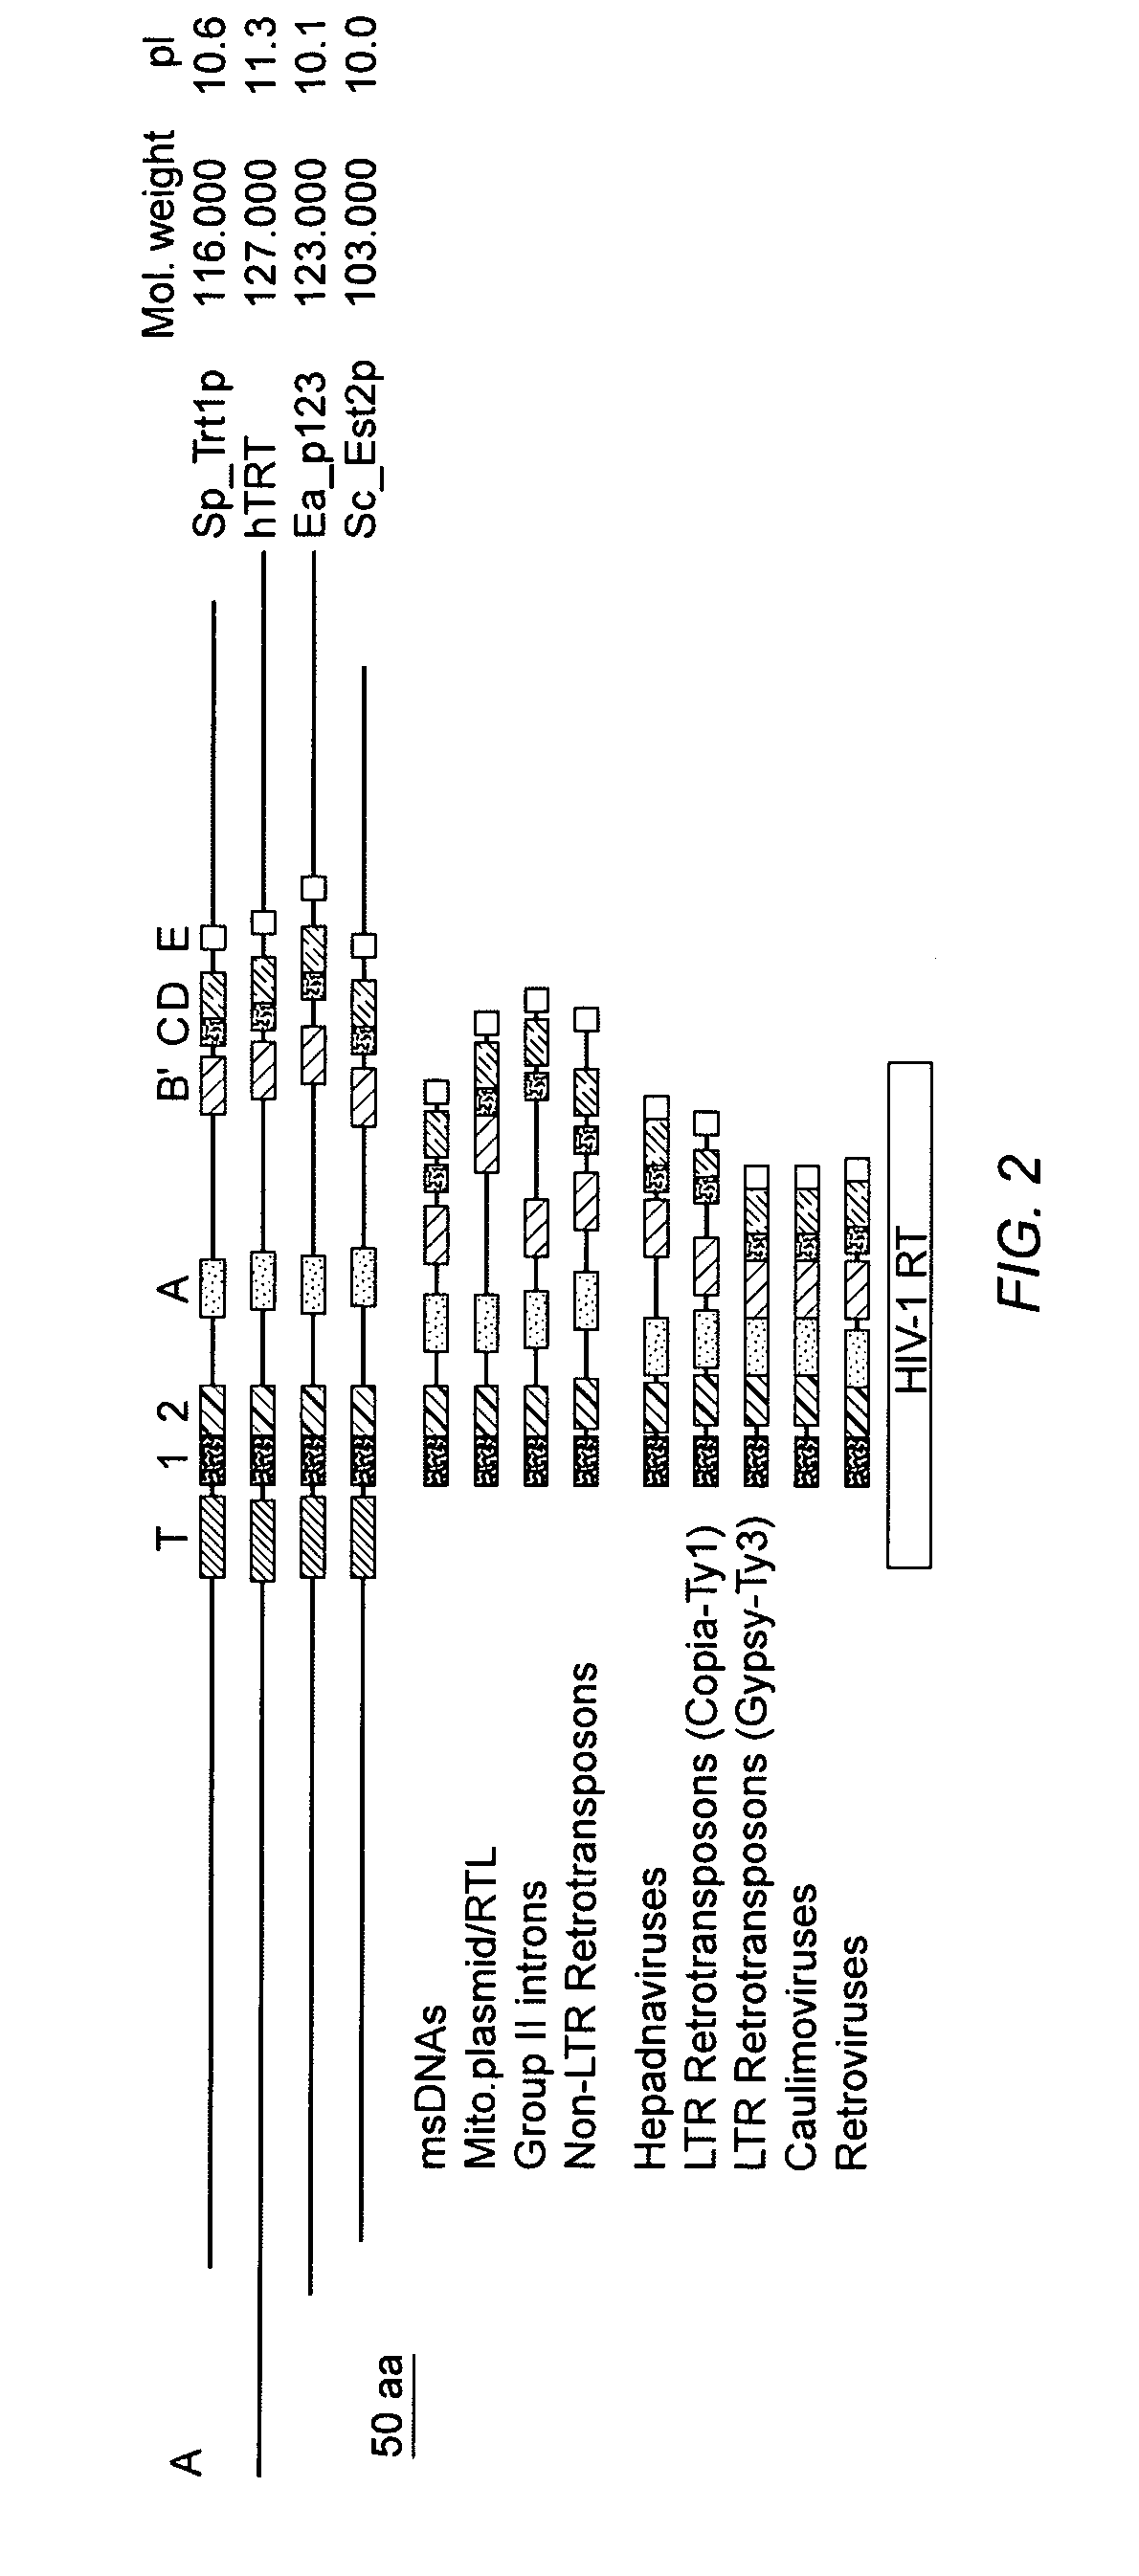 Methods for detection of human telomerase reverse transcriptive protein